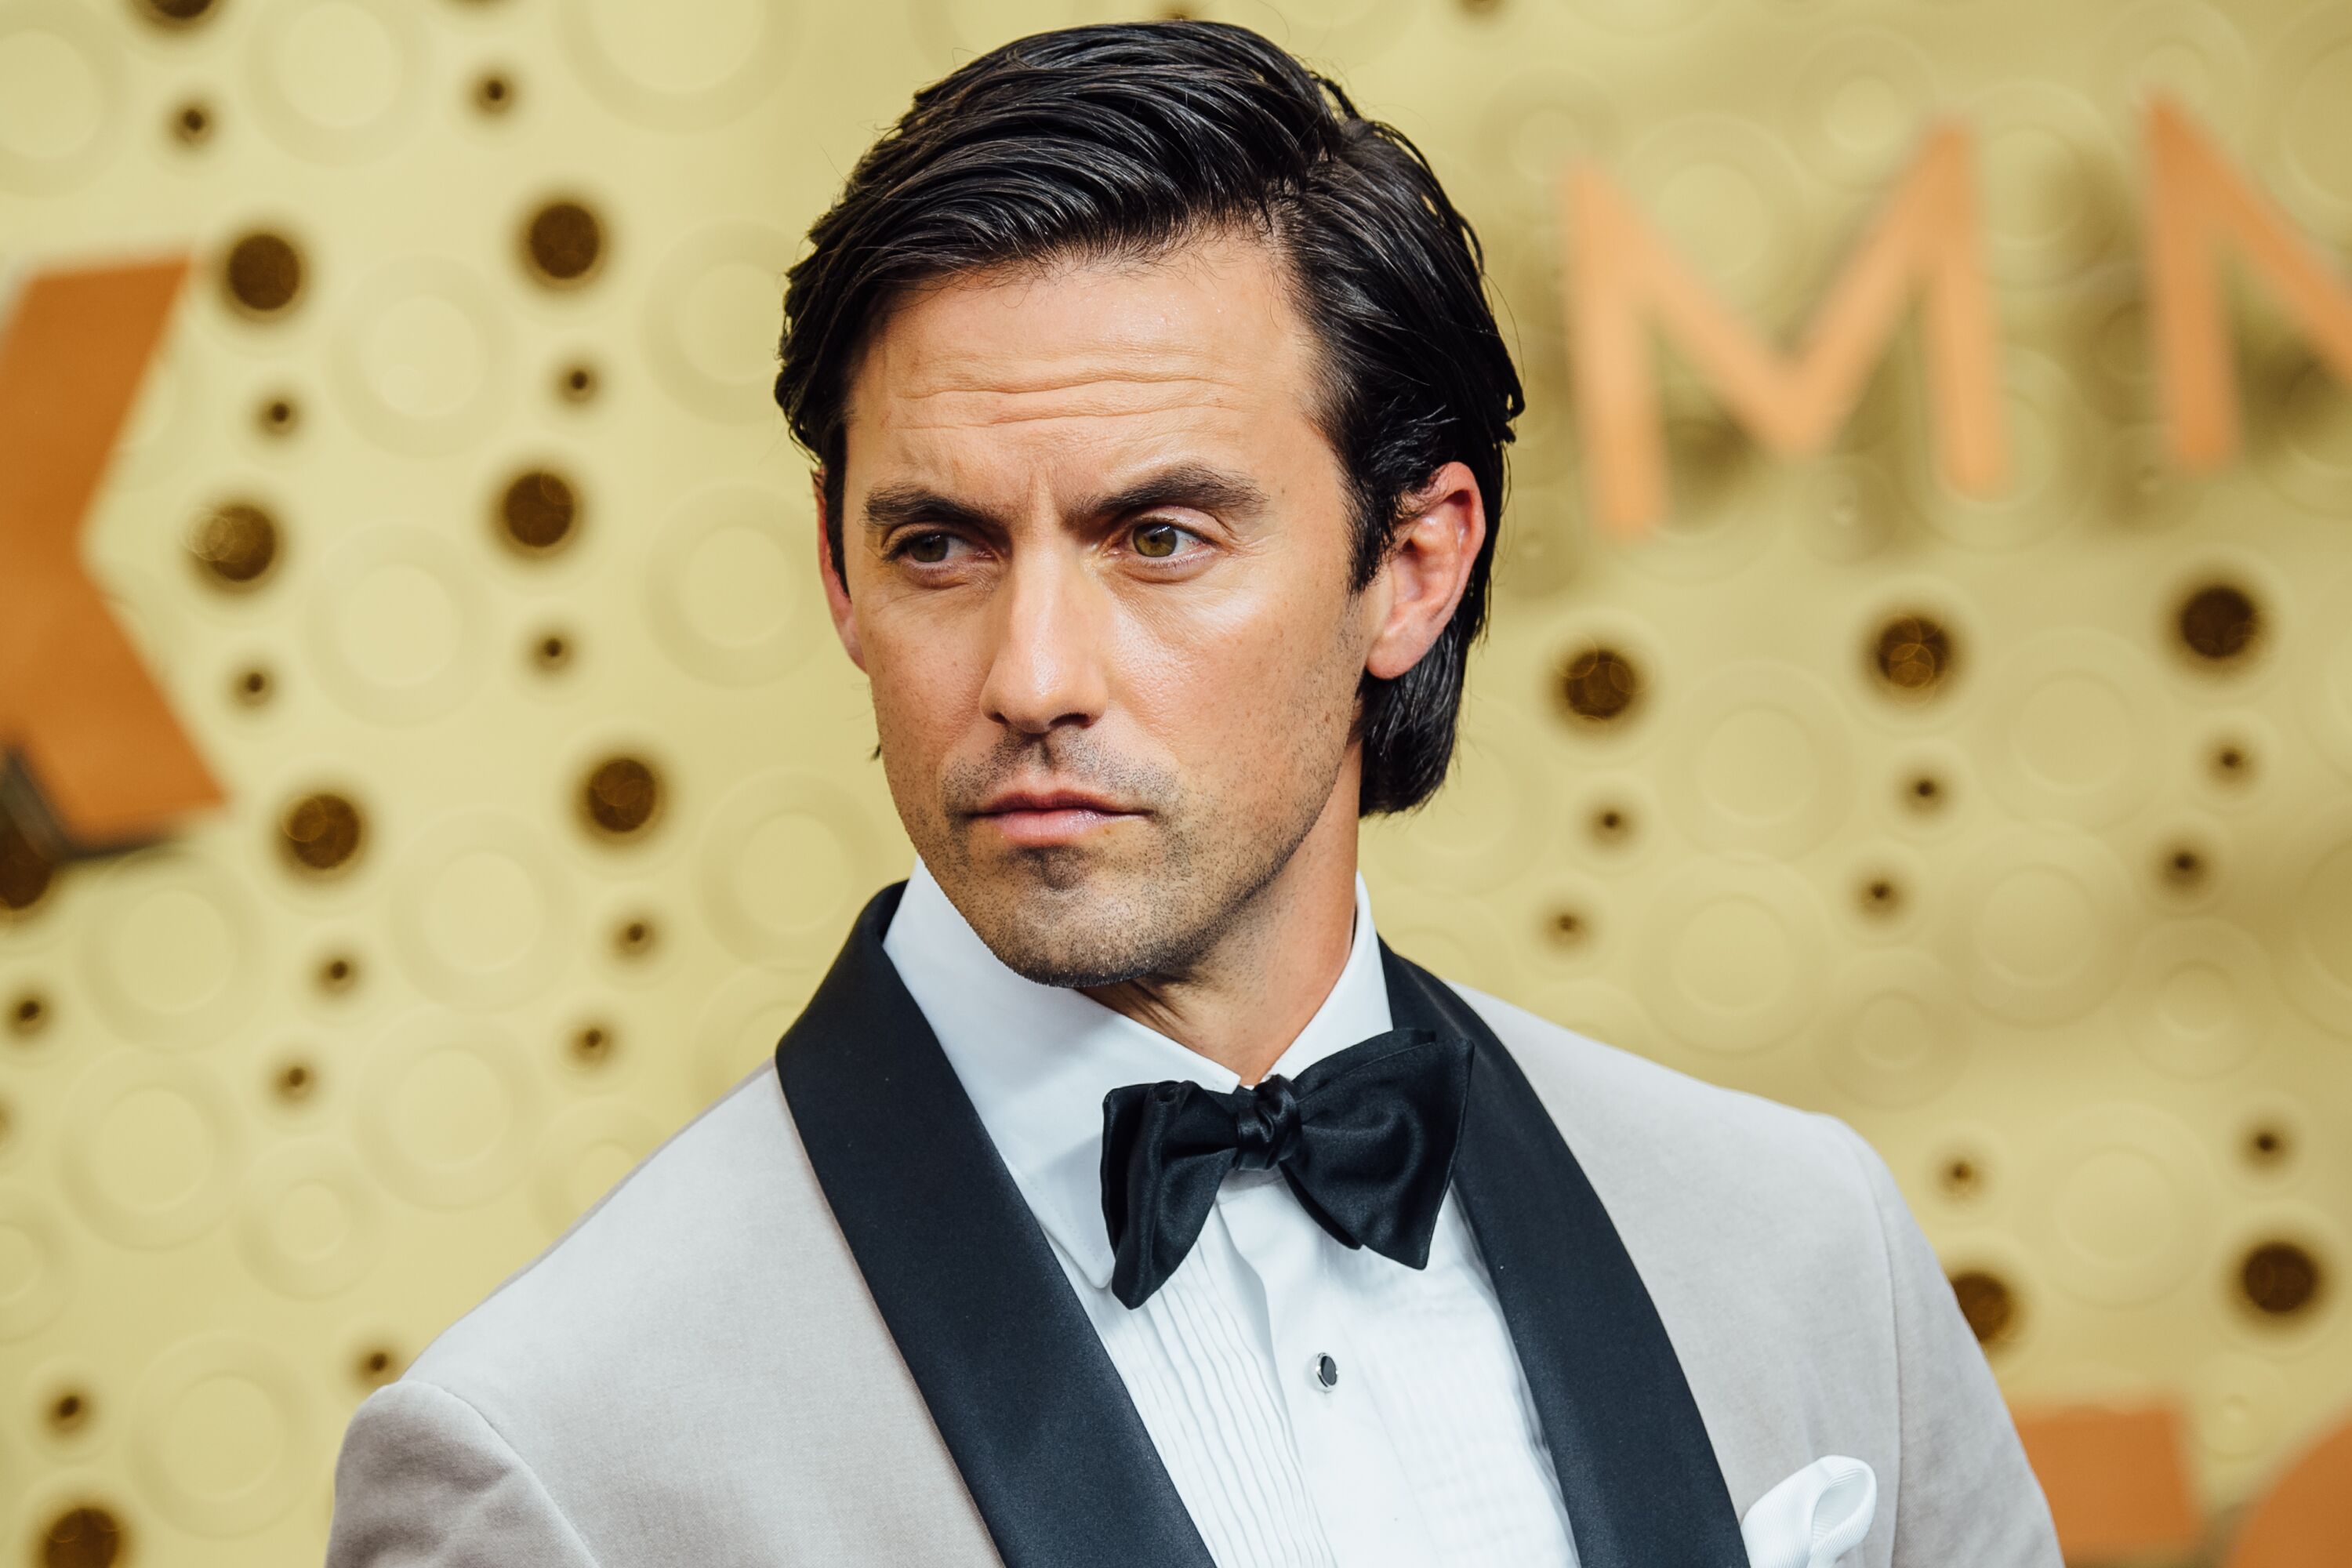 Milo Ventimiglia at the 71st Emmy Awards at Microsoft Theater on September 22, 2019, in Los Angeles, California | Photo: Emma McIntyre/Getty Images